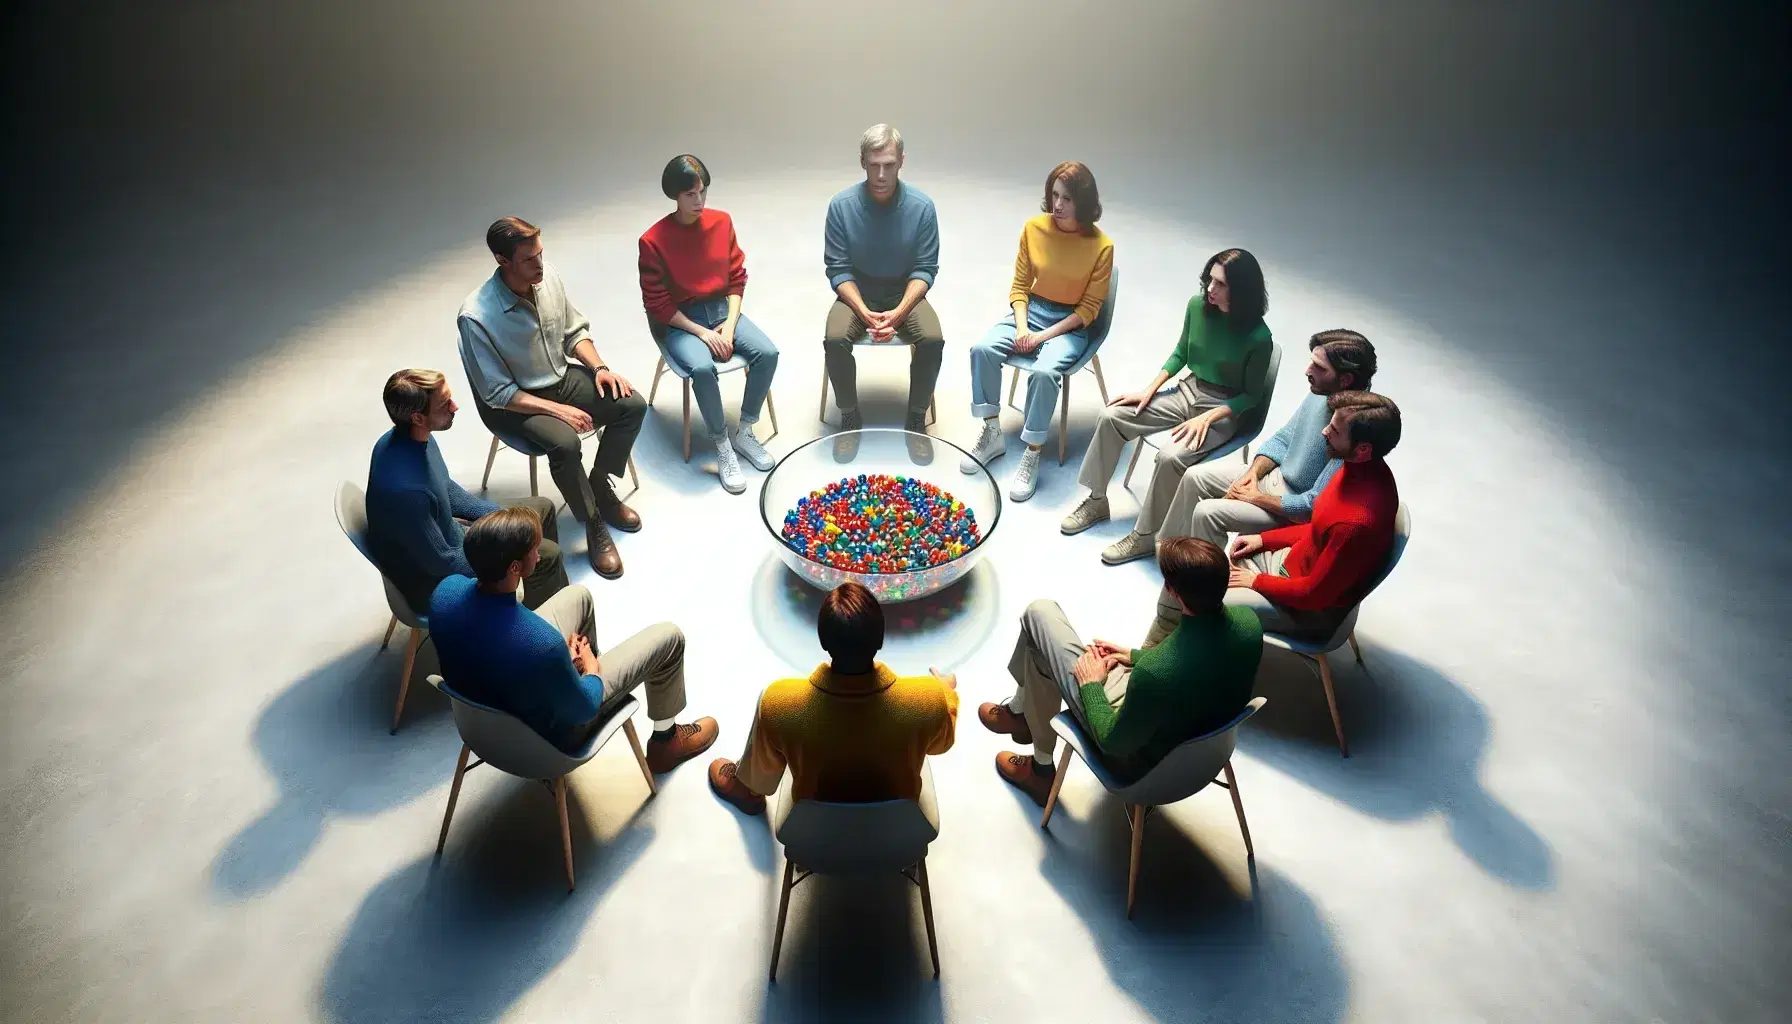 Six people sitting in a circle on gray chairs around a glass bowl with colored marbles, in a neutral, well-lit environment.